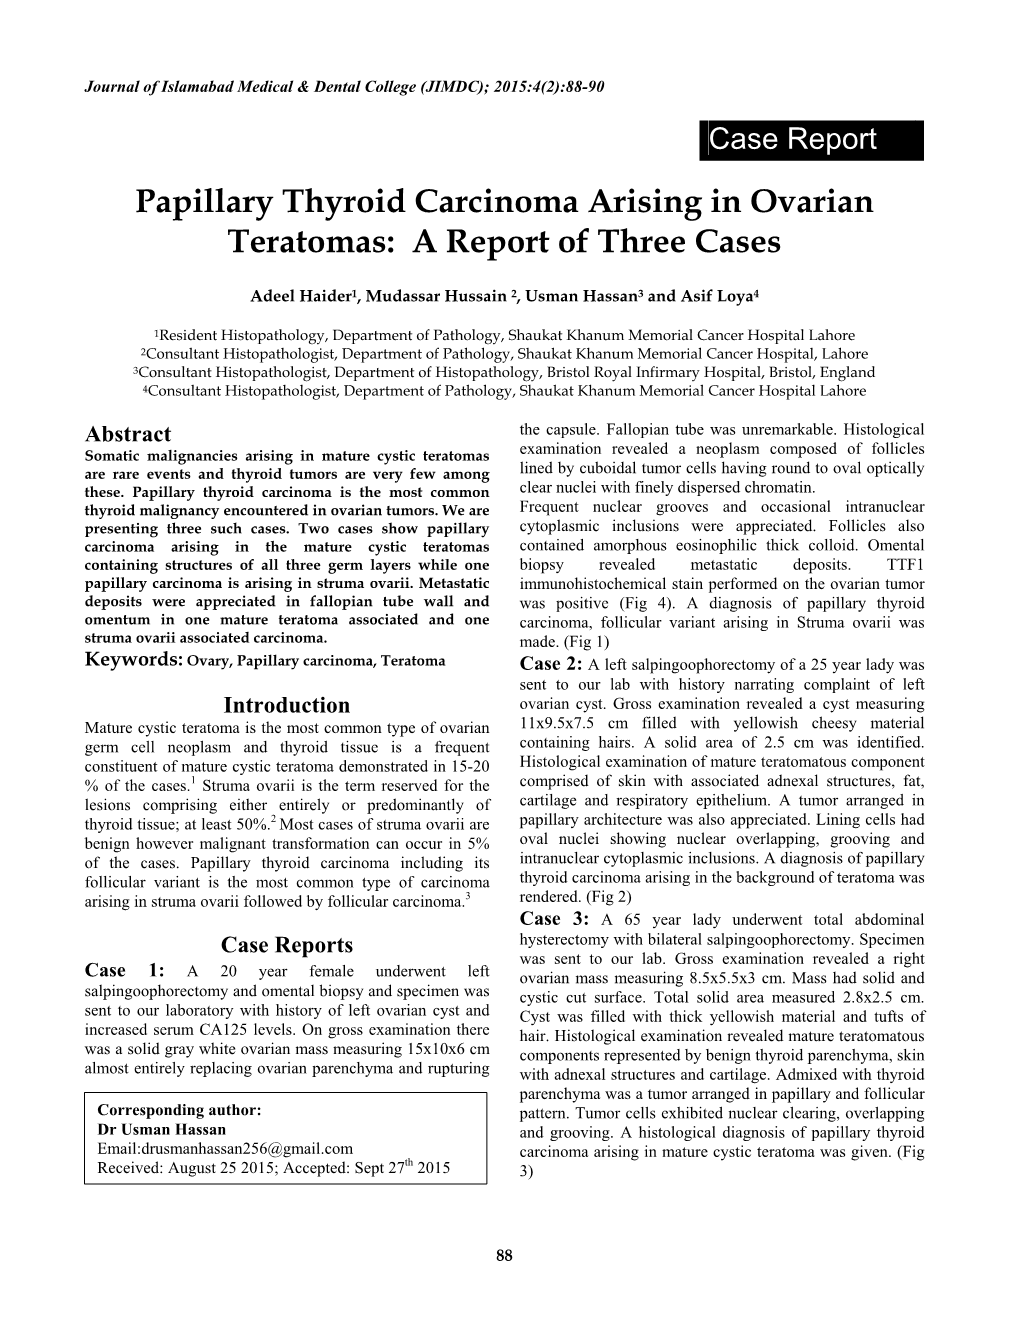 Papillary Thyroid Carcinoma Arising in Ovarian Teratomas: a Report of Three Cases